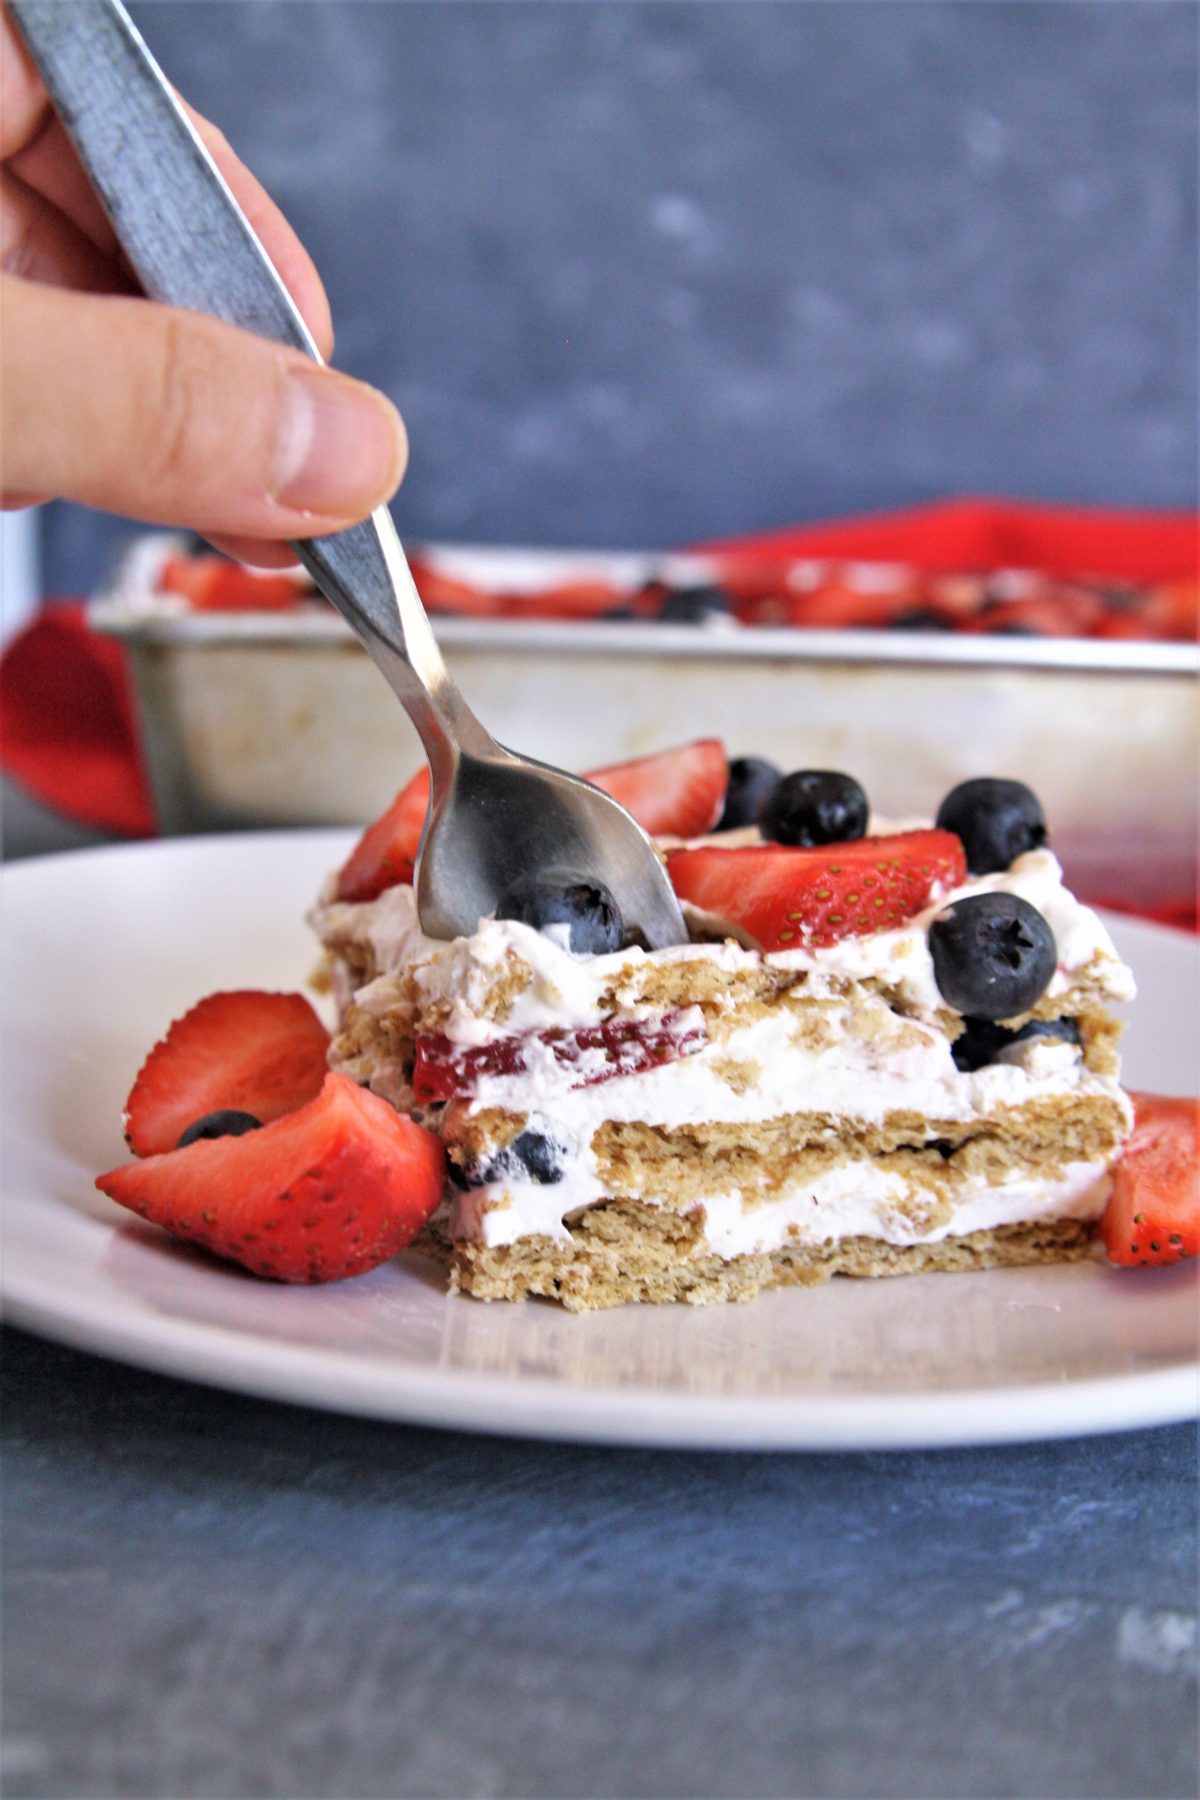 This no-bake Red, White, and Blue Icebox Cake is made with 5 simple ingredients, and is a patriotic dessert perfect for Memorial Day or Fourth of July!